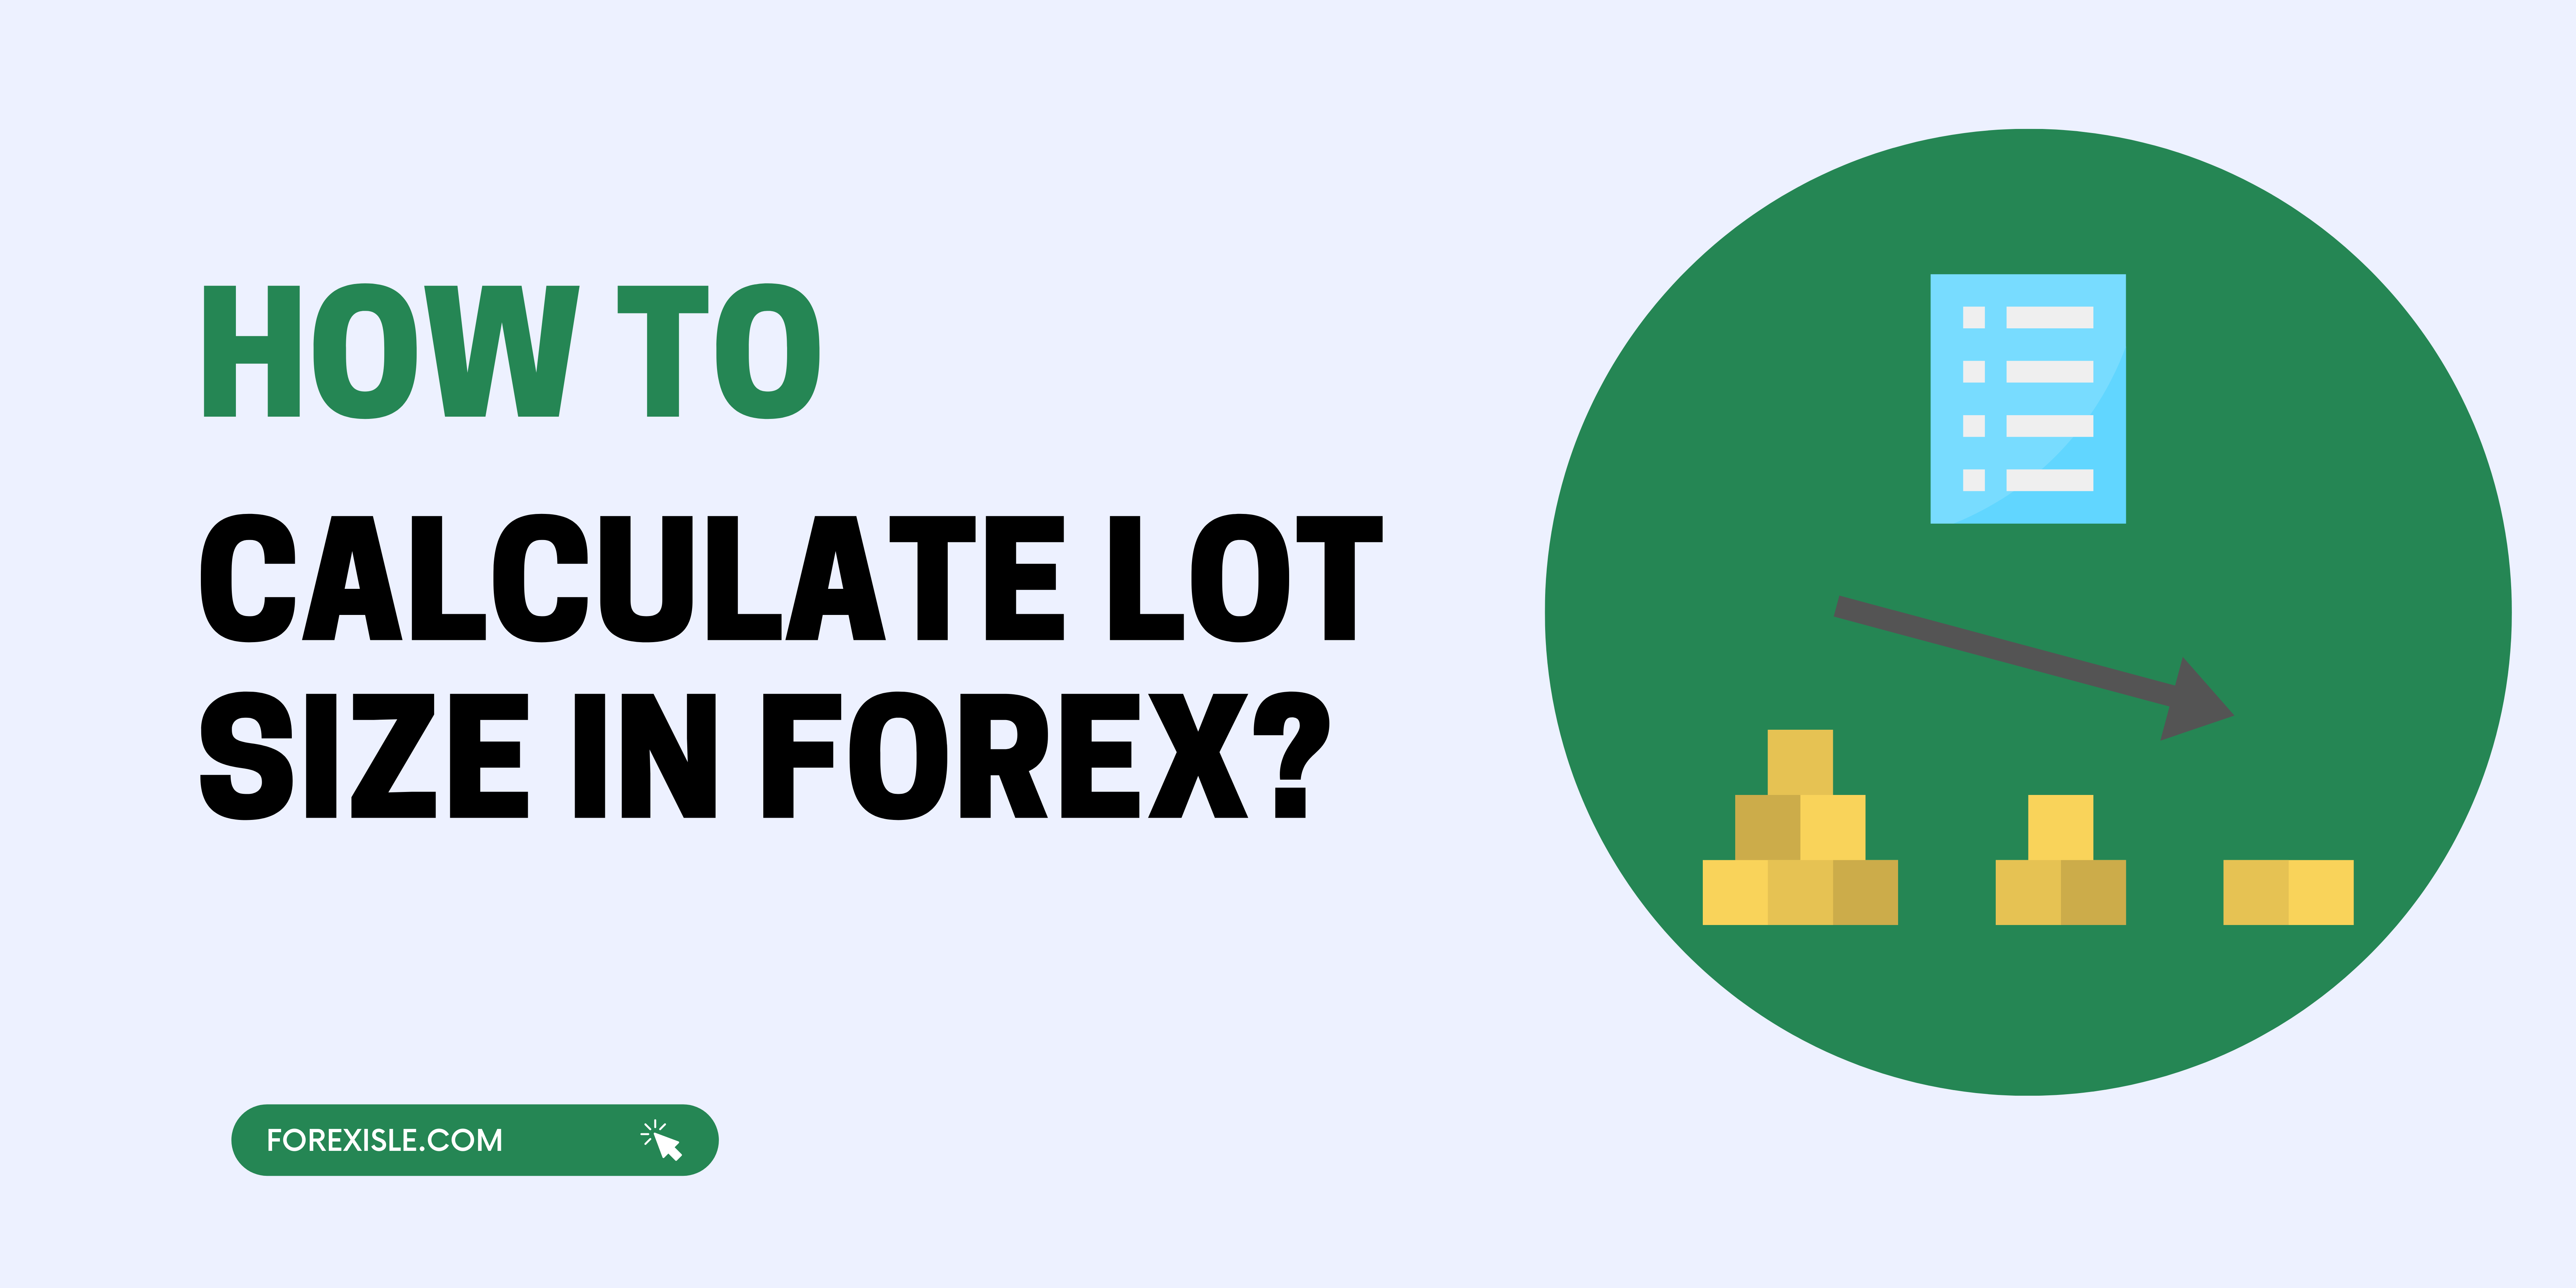 How To Calculate Lot Size In Forex Forex Isle